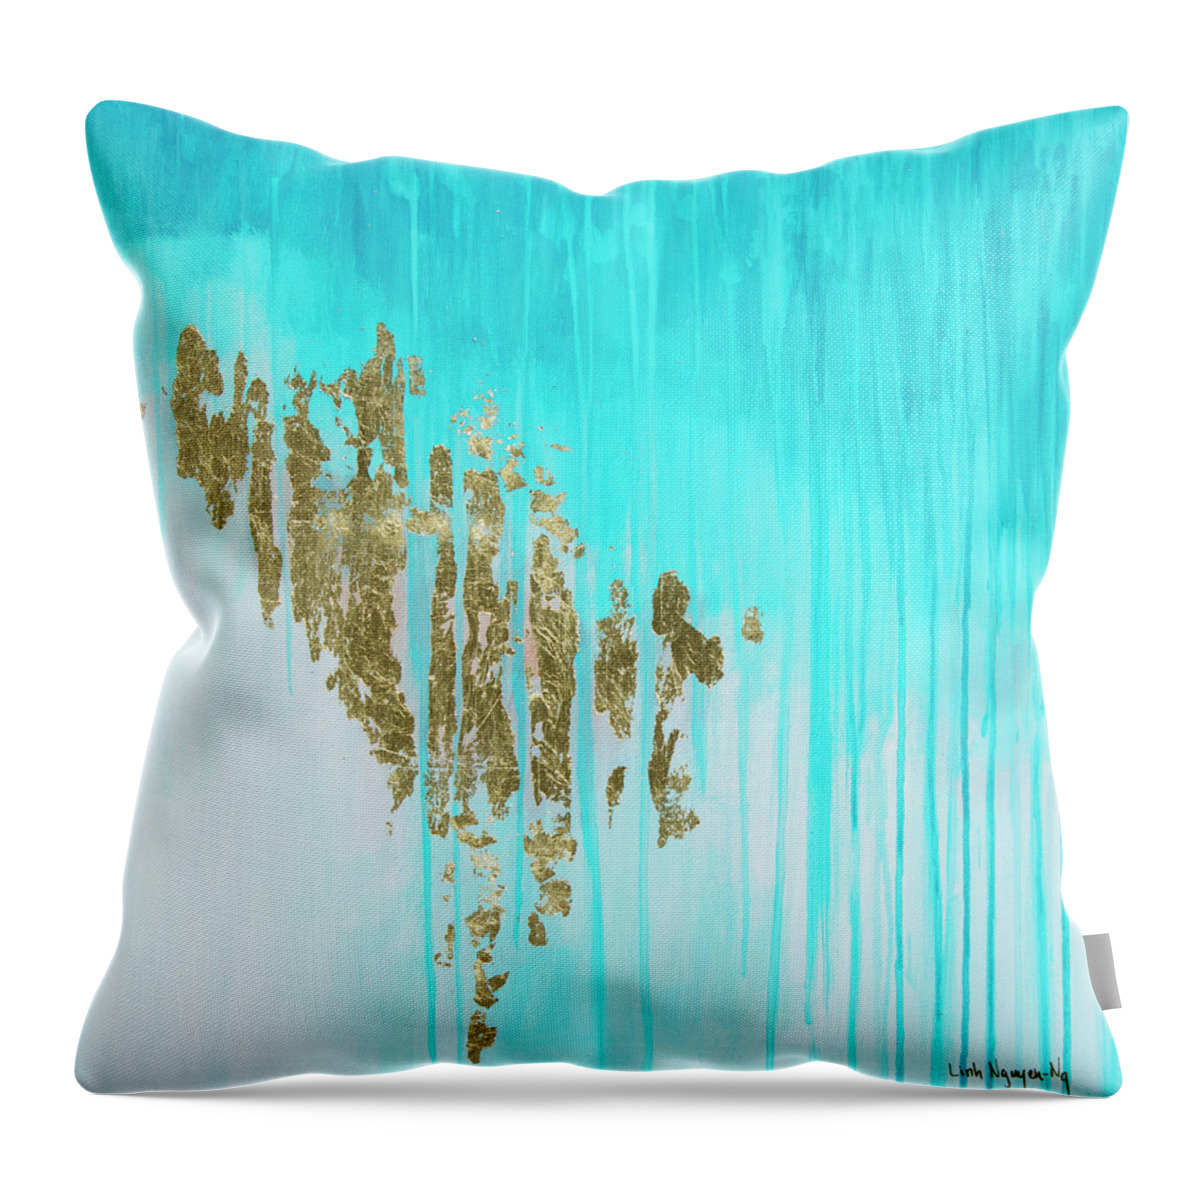 Blue Throw Pillow featuring the painting The Light From Within by Linh Nguyen-Ng